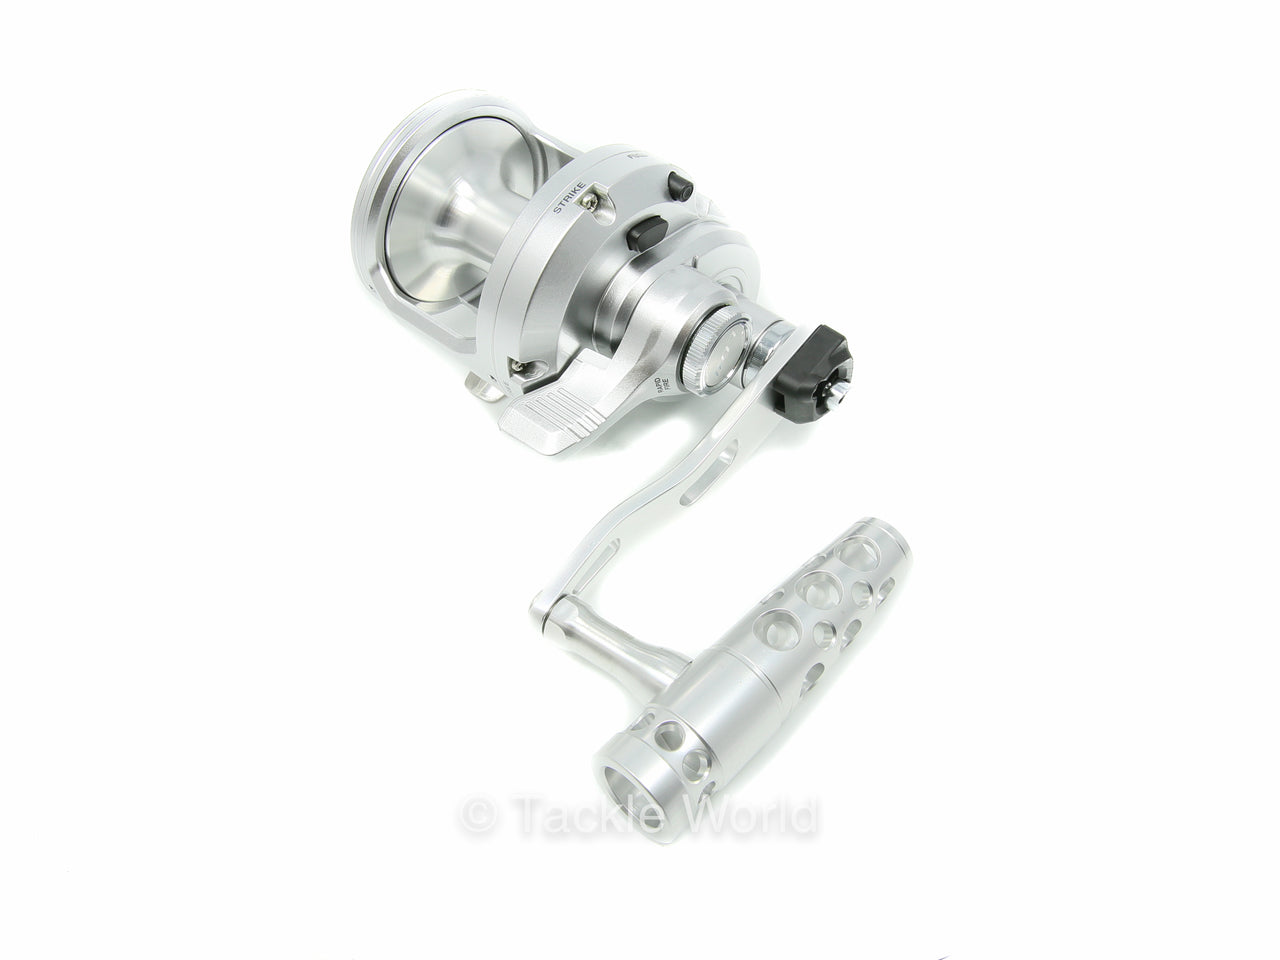 Jigging World - Power Handle for Shimano SpeedMaster 2 Speed Conventional  Reels - Silver Arm / Silver Aluminum T-Bar